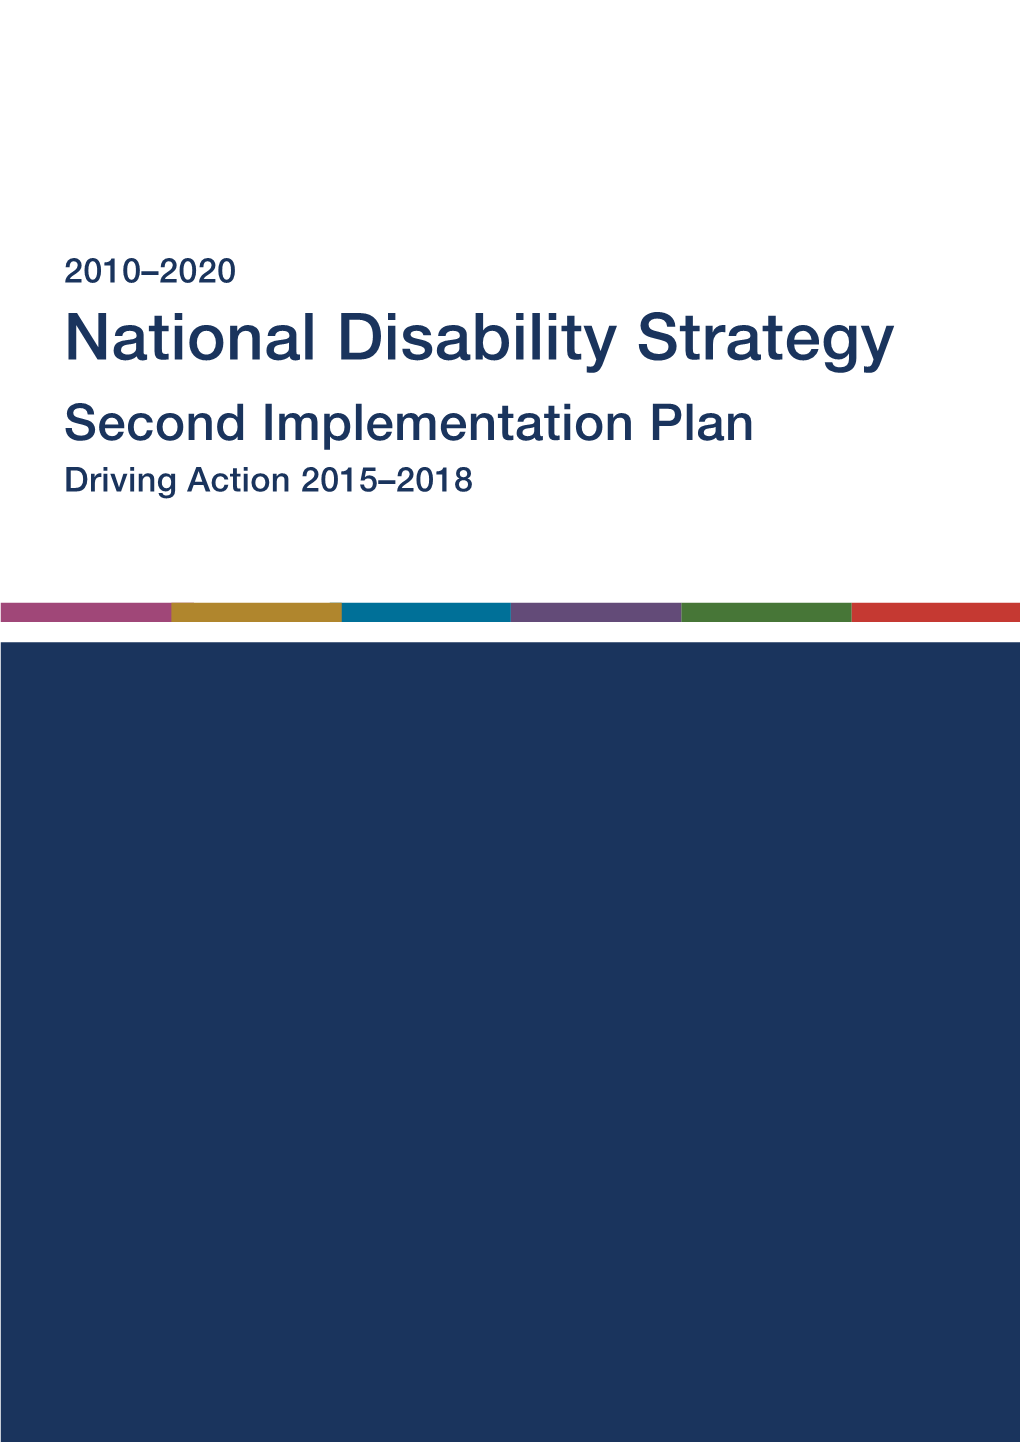 National Disability Strategy Second